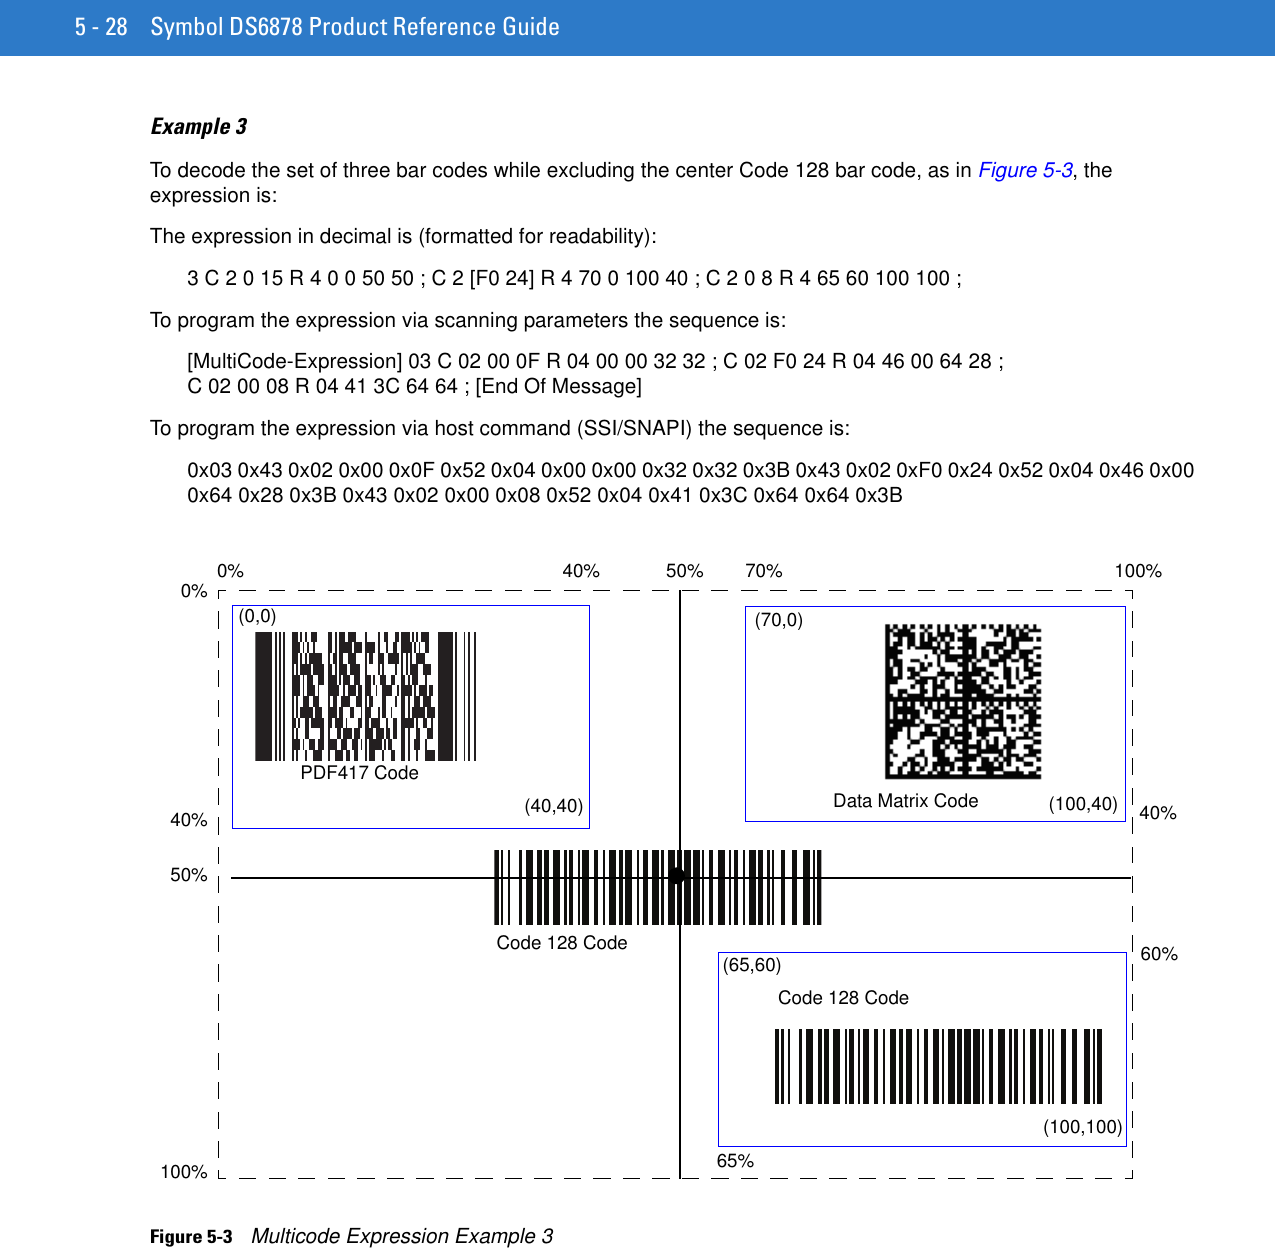 5 - 28 Symbol DS6878 Product Reference GuideExample 3To decode the set of three bar codes while excluding the center Code 128 bar code, as in Figure 5-3, the expression is:The expression in decimal is (formatted for readability):3 C 2 0 15 R 4 0 0 50 50 ; C 2 [F0 24] R 4 70 0 100 40 ; C 2 0 8 R 4 65 60 100 100 ;To program the expression via scanning parameters the sequence is:[MultiCode-Expression] 03 C 02 00 0F R 04 00 00 32 32 ; C 02 F0 24 R 04 46 00 64 28 ; C 02 00 08 R 04 41 3C 64 64 ; [End Of Message]To program the expression via host command (SSI/SNAPI) the sequence is:0x03 0x43 0x02 0x00 0x0F 0x52 0x04 0x00 0x00 0x32 0x32 0x3B 0x43 0x02 0xF0 0x24 0x52 0x04 0x46 0x00 0x64 0x28 0x3B 0x43 0x02 0x00 0x08 0x52 0x04 0x41 0x3C 0x64 0x64 0x3BFigure 5-3    Multicode Expression Example 3 40%65%40%40%PDF417 CodeCode 128 CodeData Matrix CodeCode 128 Code70%60%(70,0)(100,40)(100,100)(0,0)(40,40)(65,60)50%0%100%0% 50% 100%